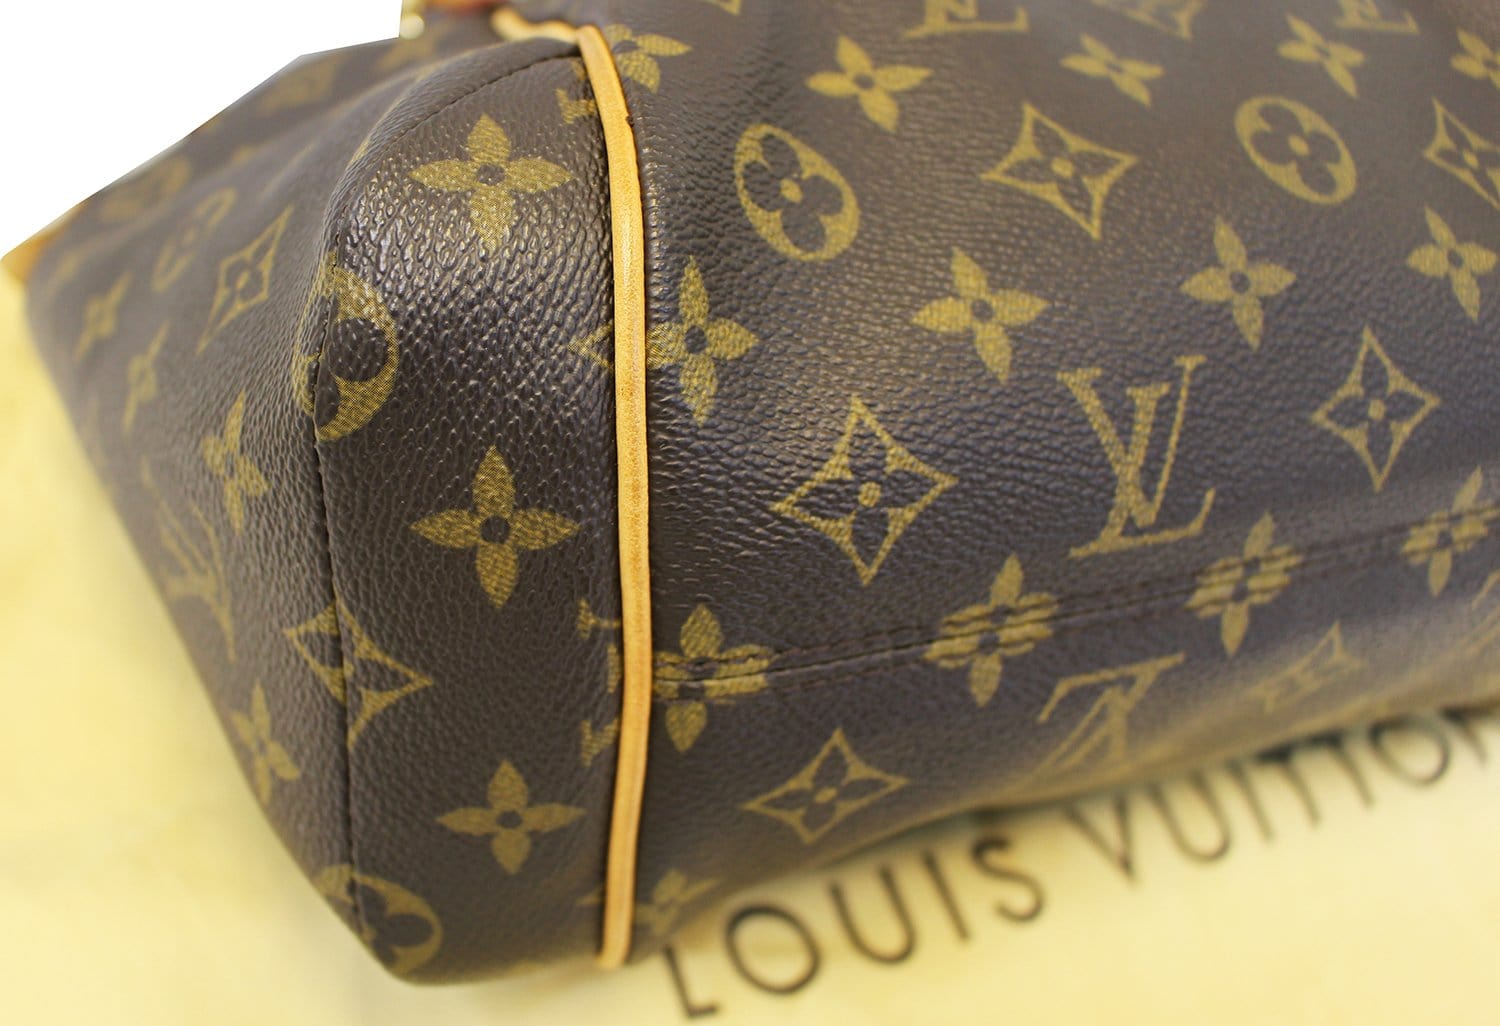 Louis-Vuitton-Monogram-Totally-PM-Tote-Bag-Brown-M56688 – dct-ep_vintage  luxury Store